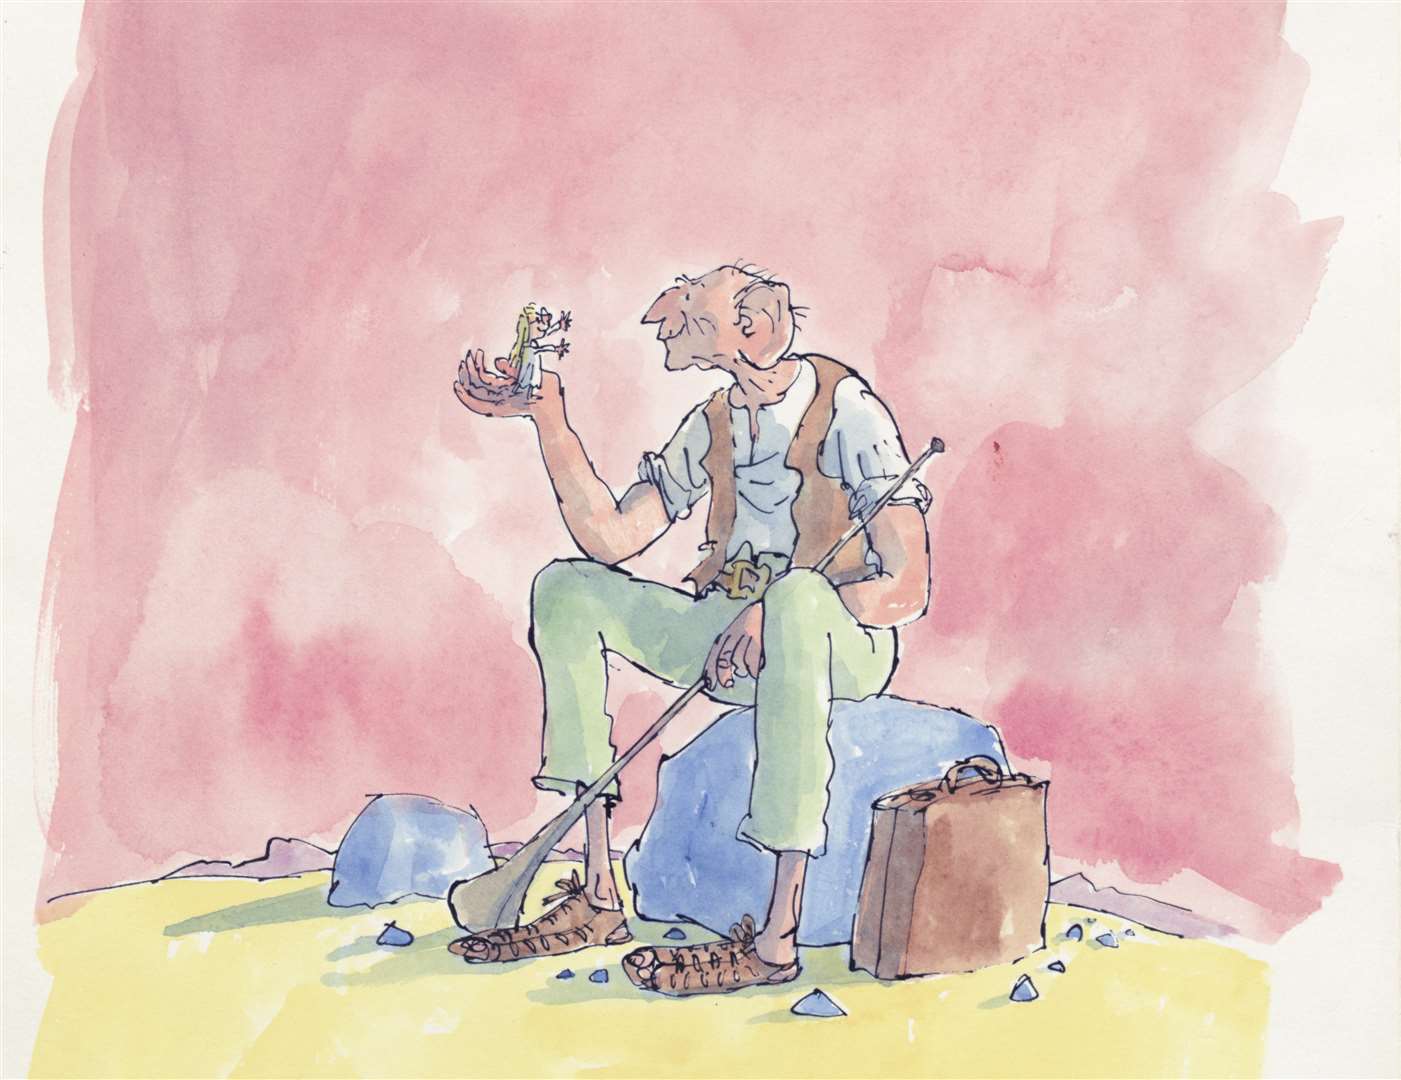 BFG in Pictures was put together by Quentin Blake and The House of Illustration